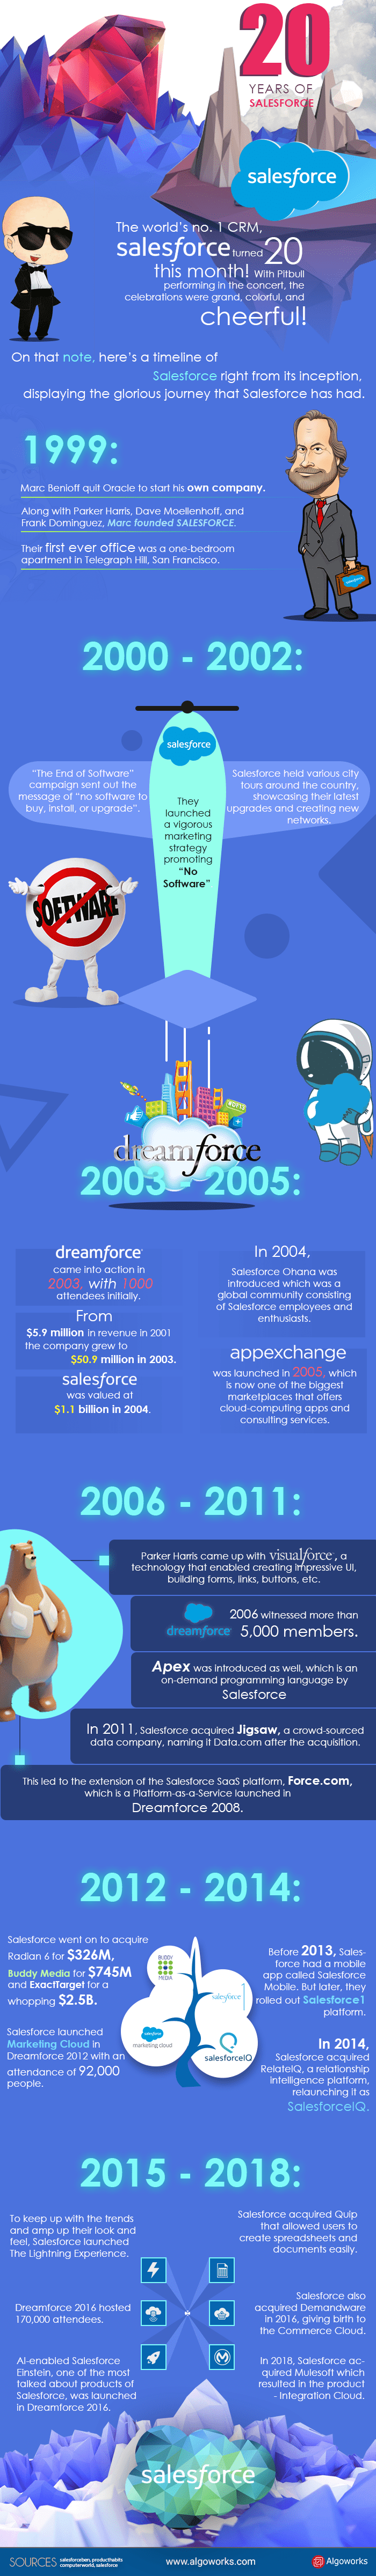 20 Years of Salesforce Timeline